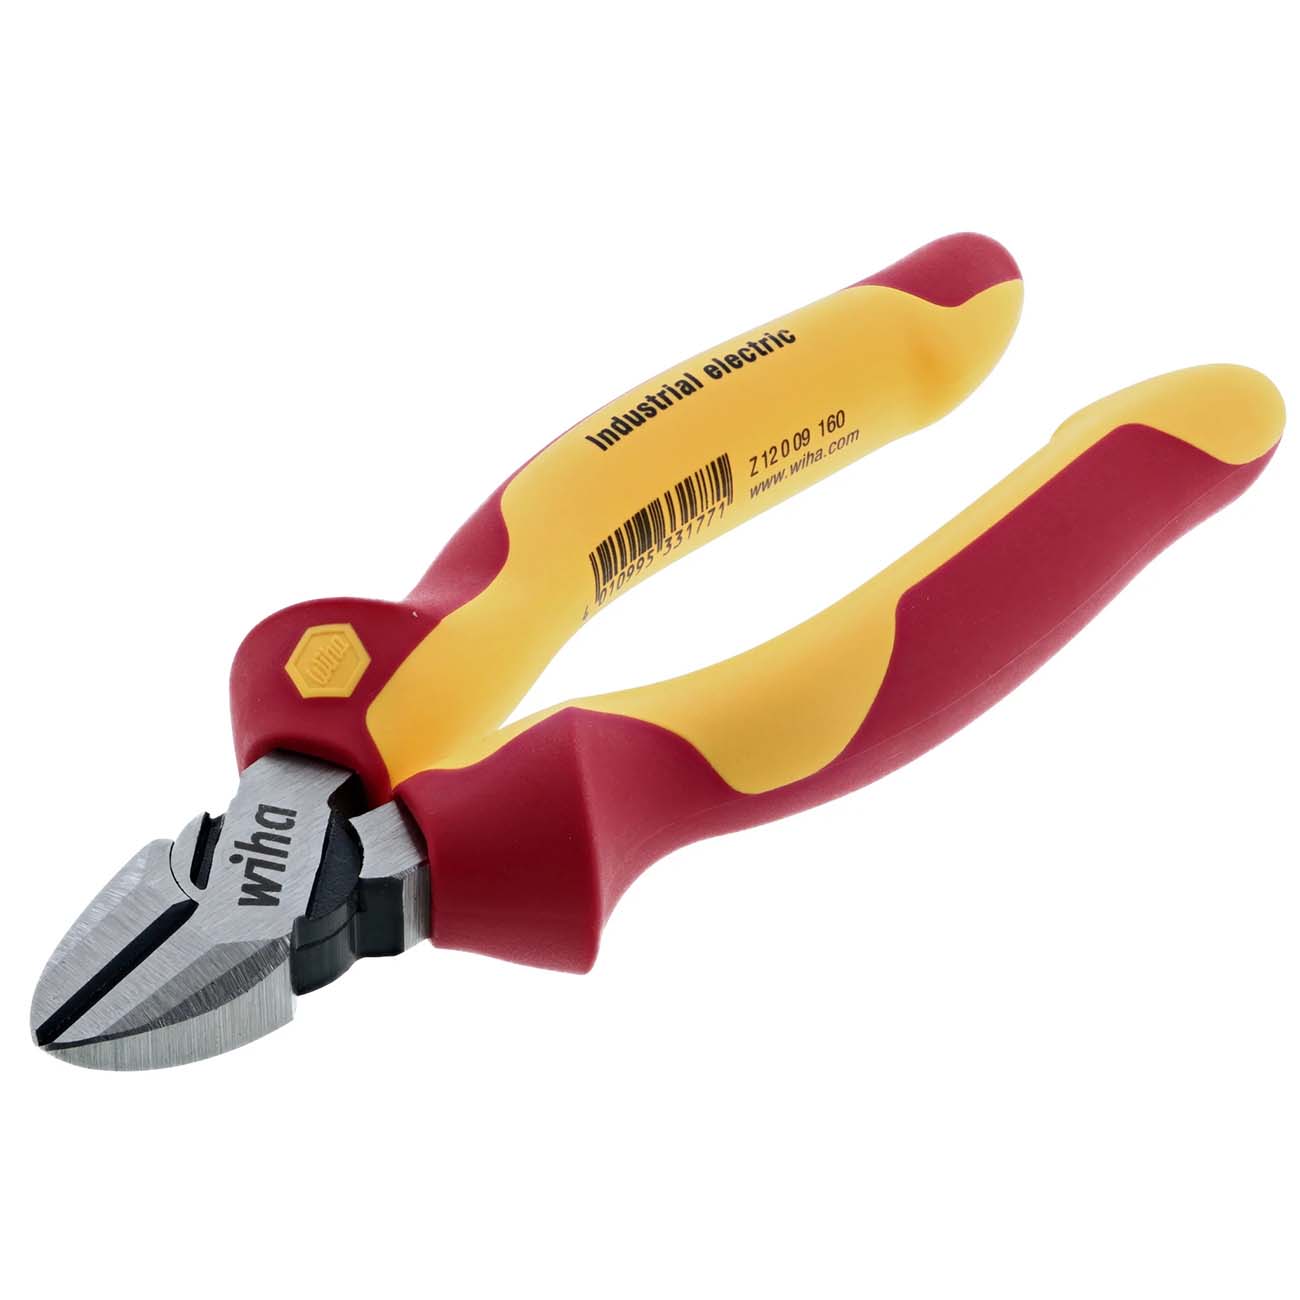 Wiha Insulated Industrial Diagonal Cutters - 6.3" Overall Length